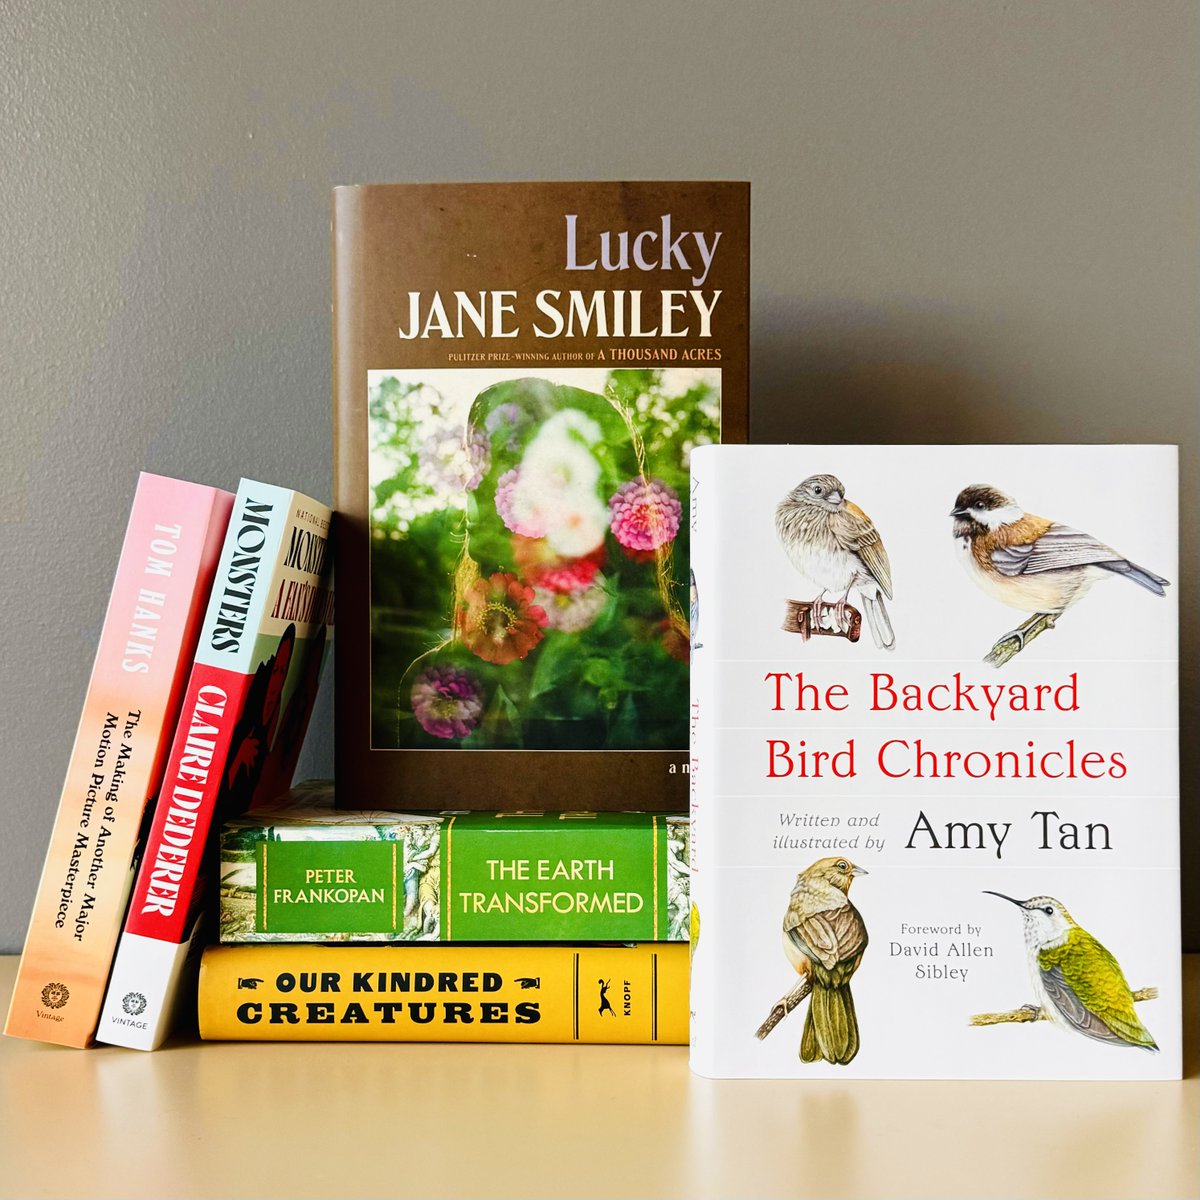 Out today: 🕊️ THE BACKYARD BIRD CHRONICLES by Amy Tan 🍀 LUCKY by Jane Smiley 🐕 OUR KINDRED CREATURES by Bill Wasik and Monica Murphy 🌏 THE EARTH TRANSFORMED by Peter Frankopan 🍿 THE MAKING OF ANOTHER MAJOR MOTION PICTURE MASTERPIECE by Tom Hanks 👹 MONSTERS by Claire Dederer